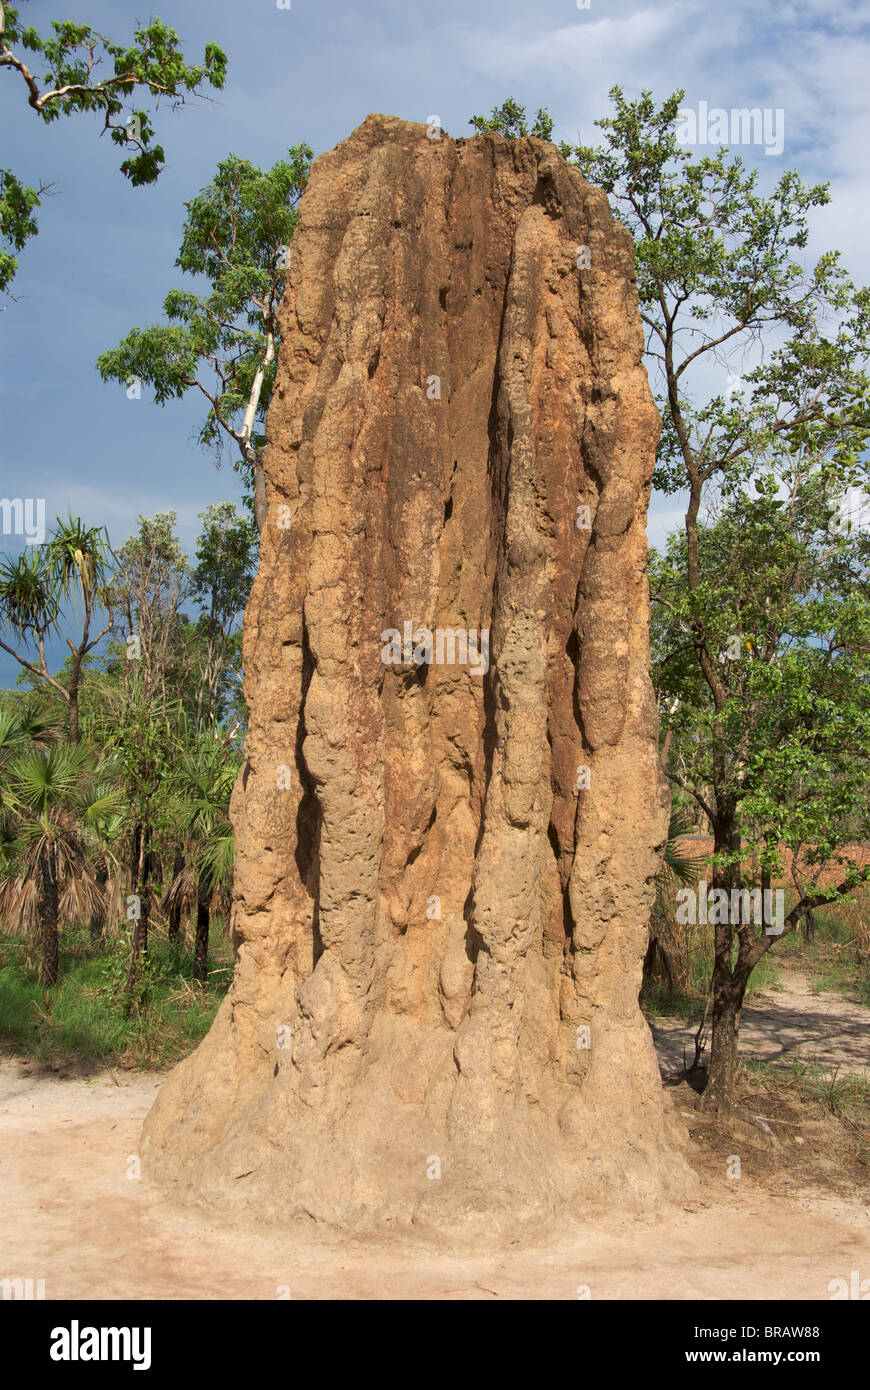 A tall mound of the Spinifex Termite (Nasutitermes triodiae) in Litchfield National Park, Northern Territory, Australia. Stock Photo